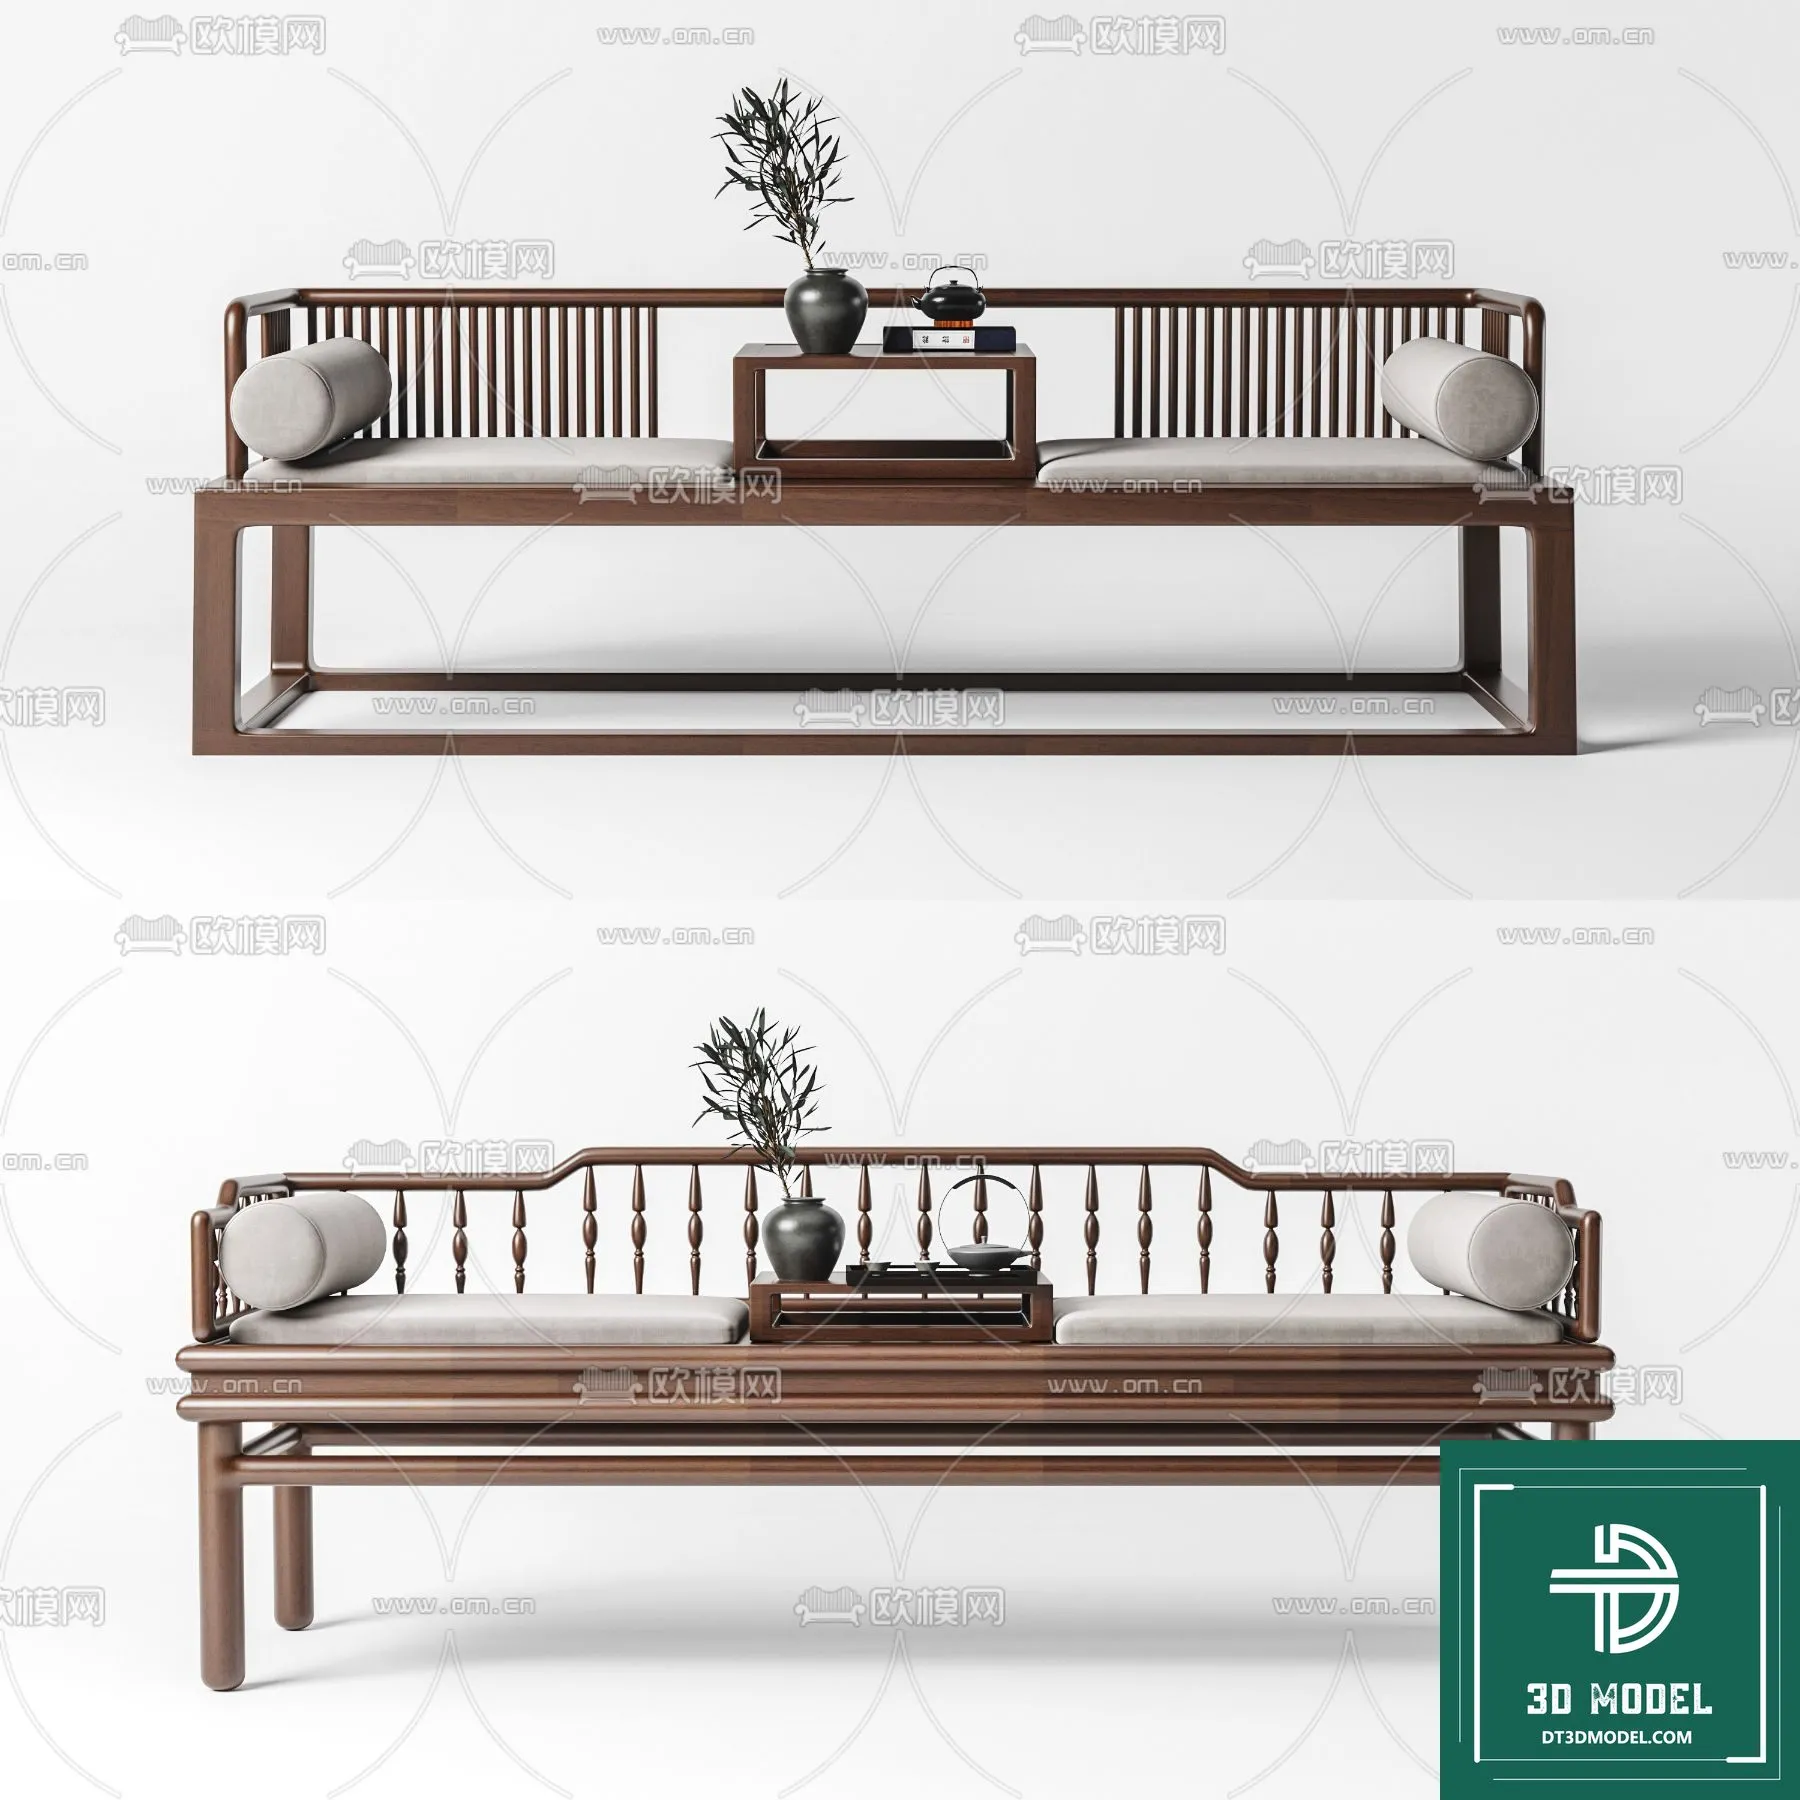 INDOCHINE STYLE – 3D MODELS – 485